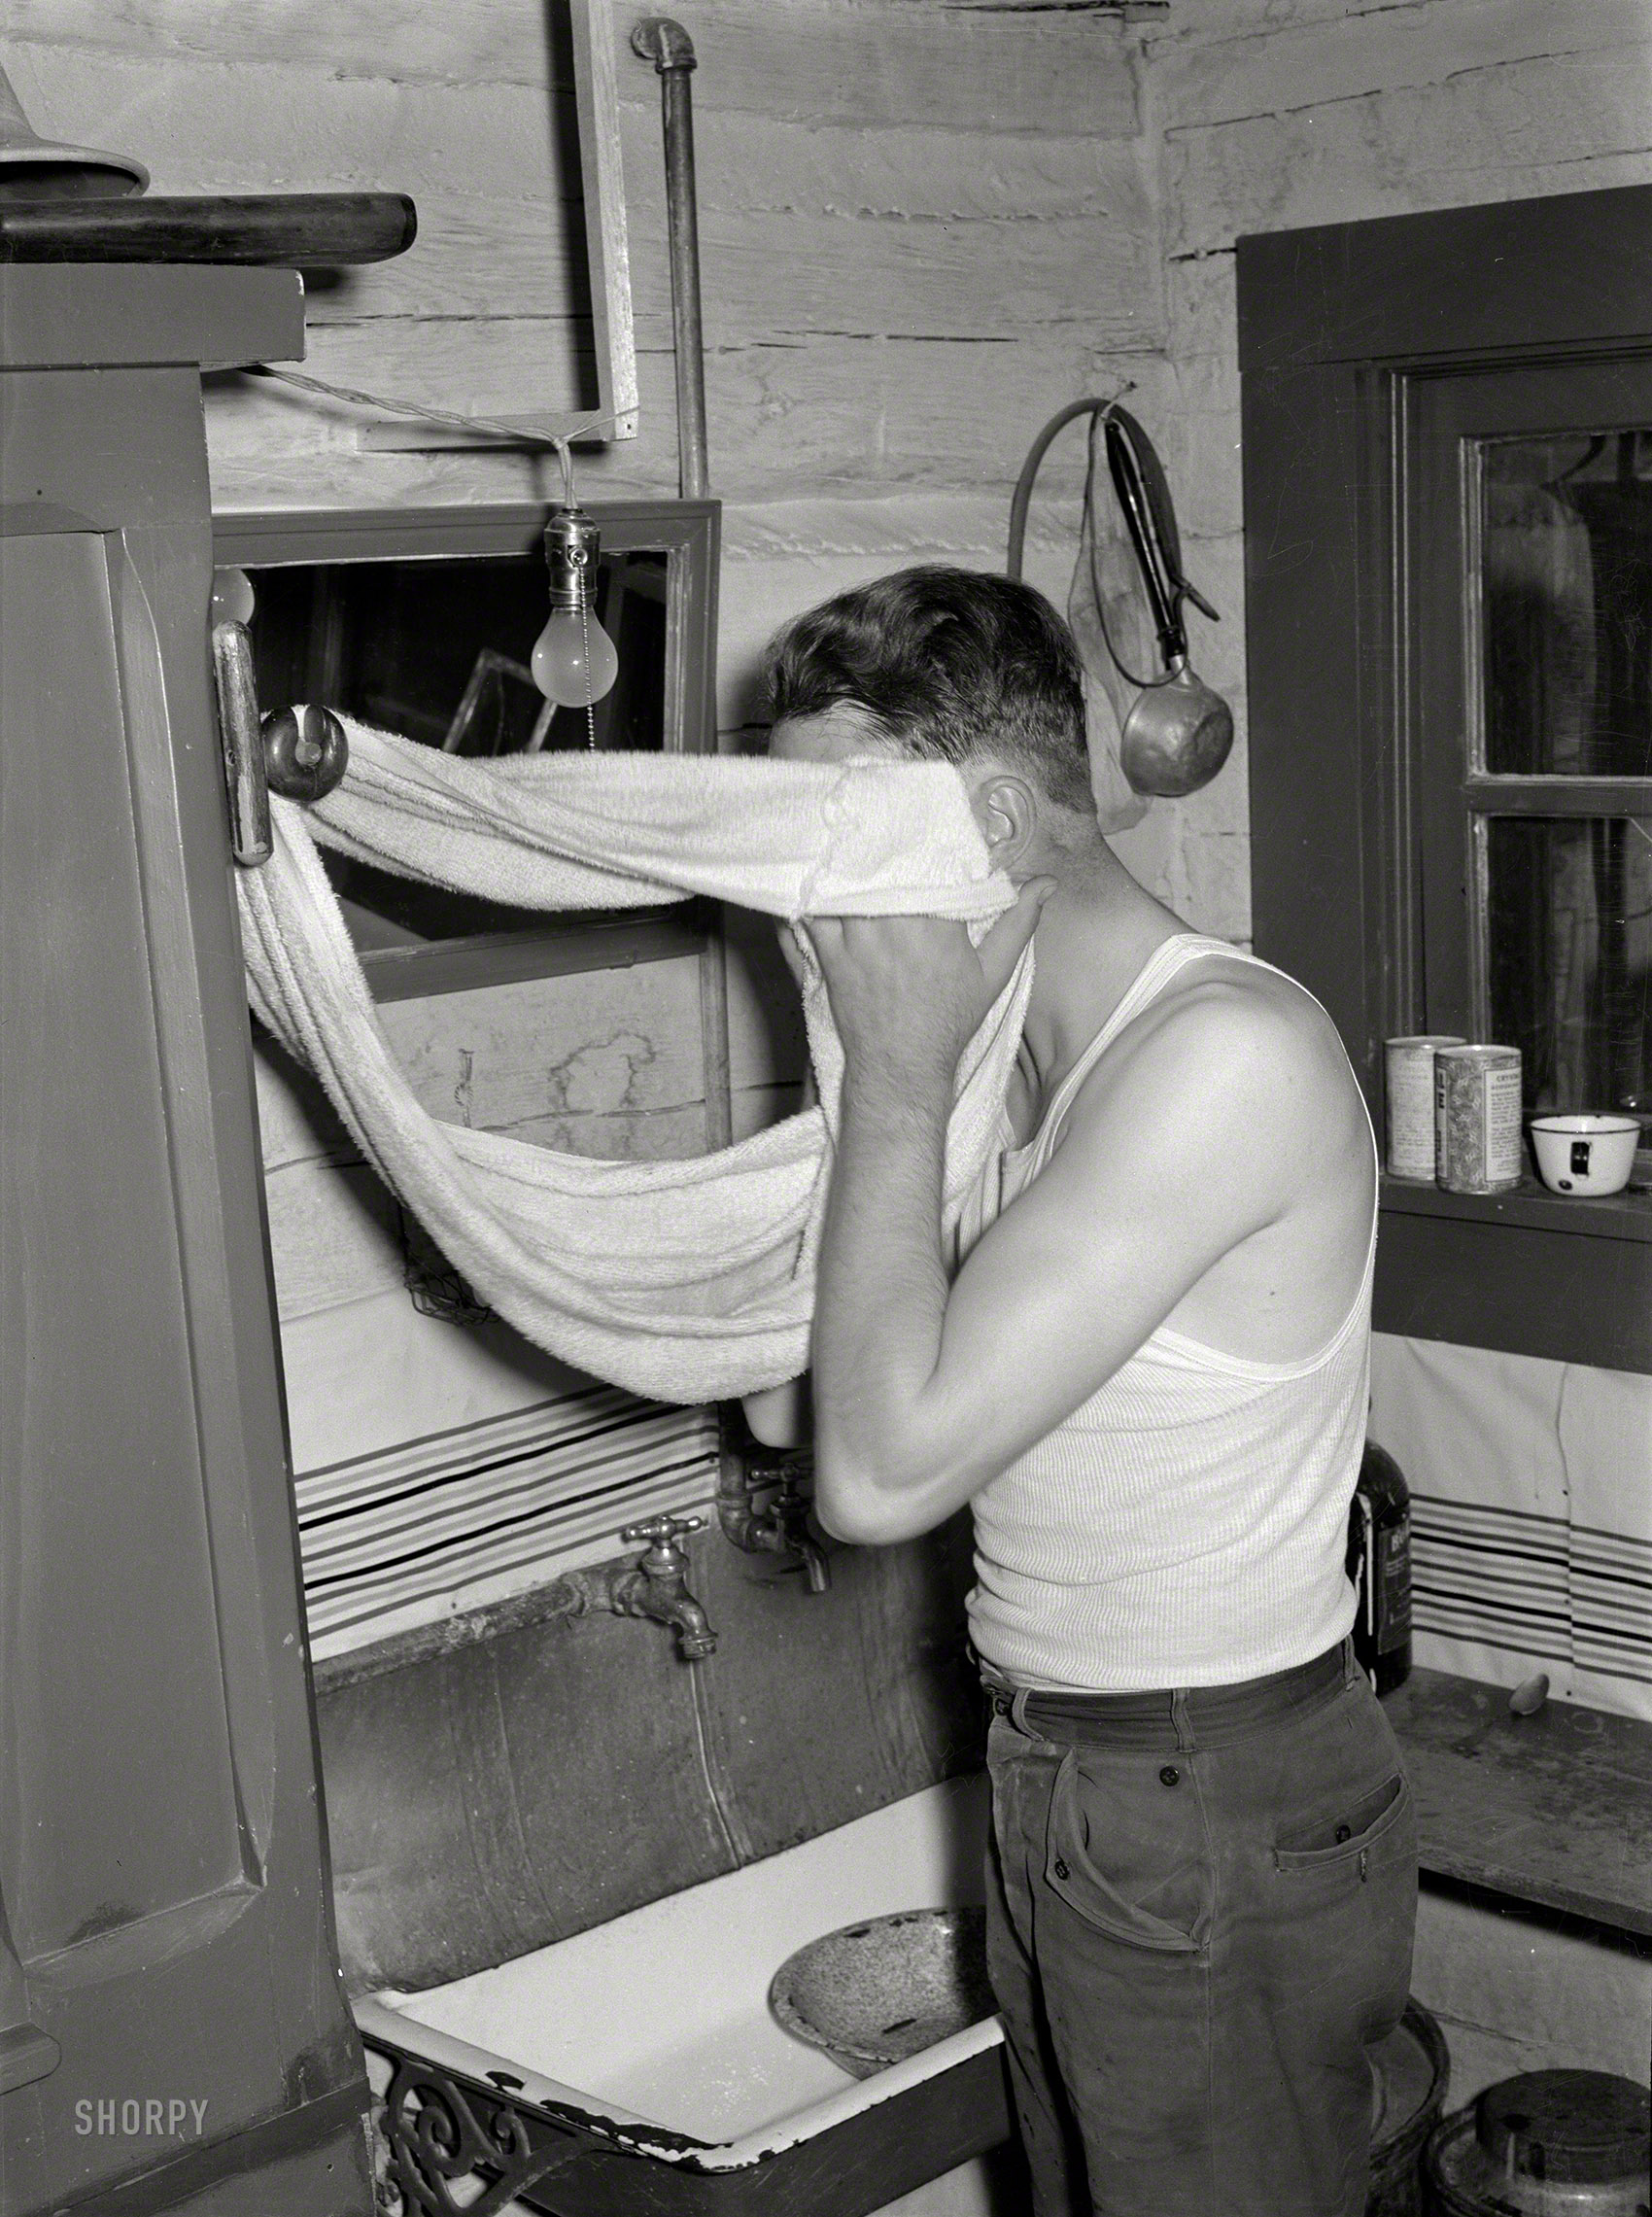 June 1939. "Cowhand using roller towel. Quarter Circle 'U' Ranch, Big Horn County, Montana." Photo by Arthur Rothstein for the FSA. View full size.